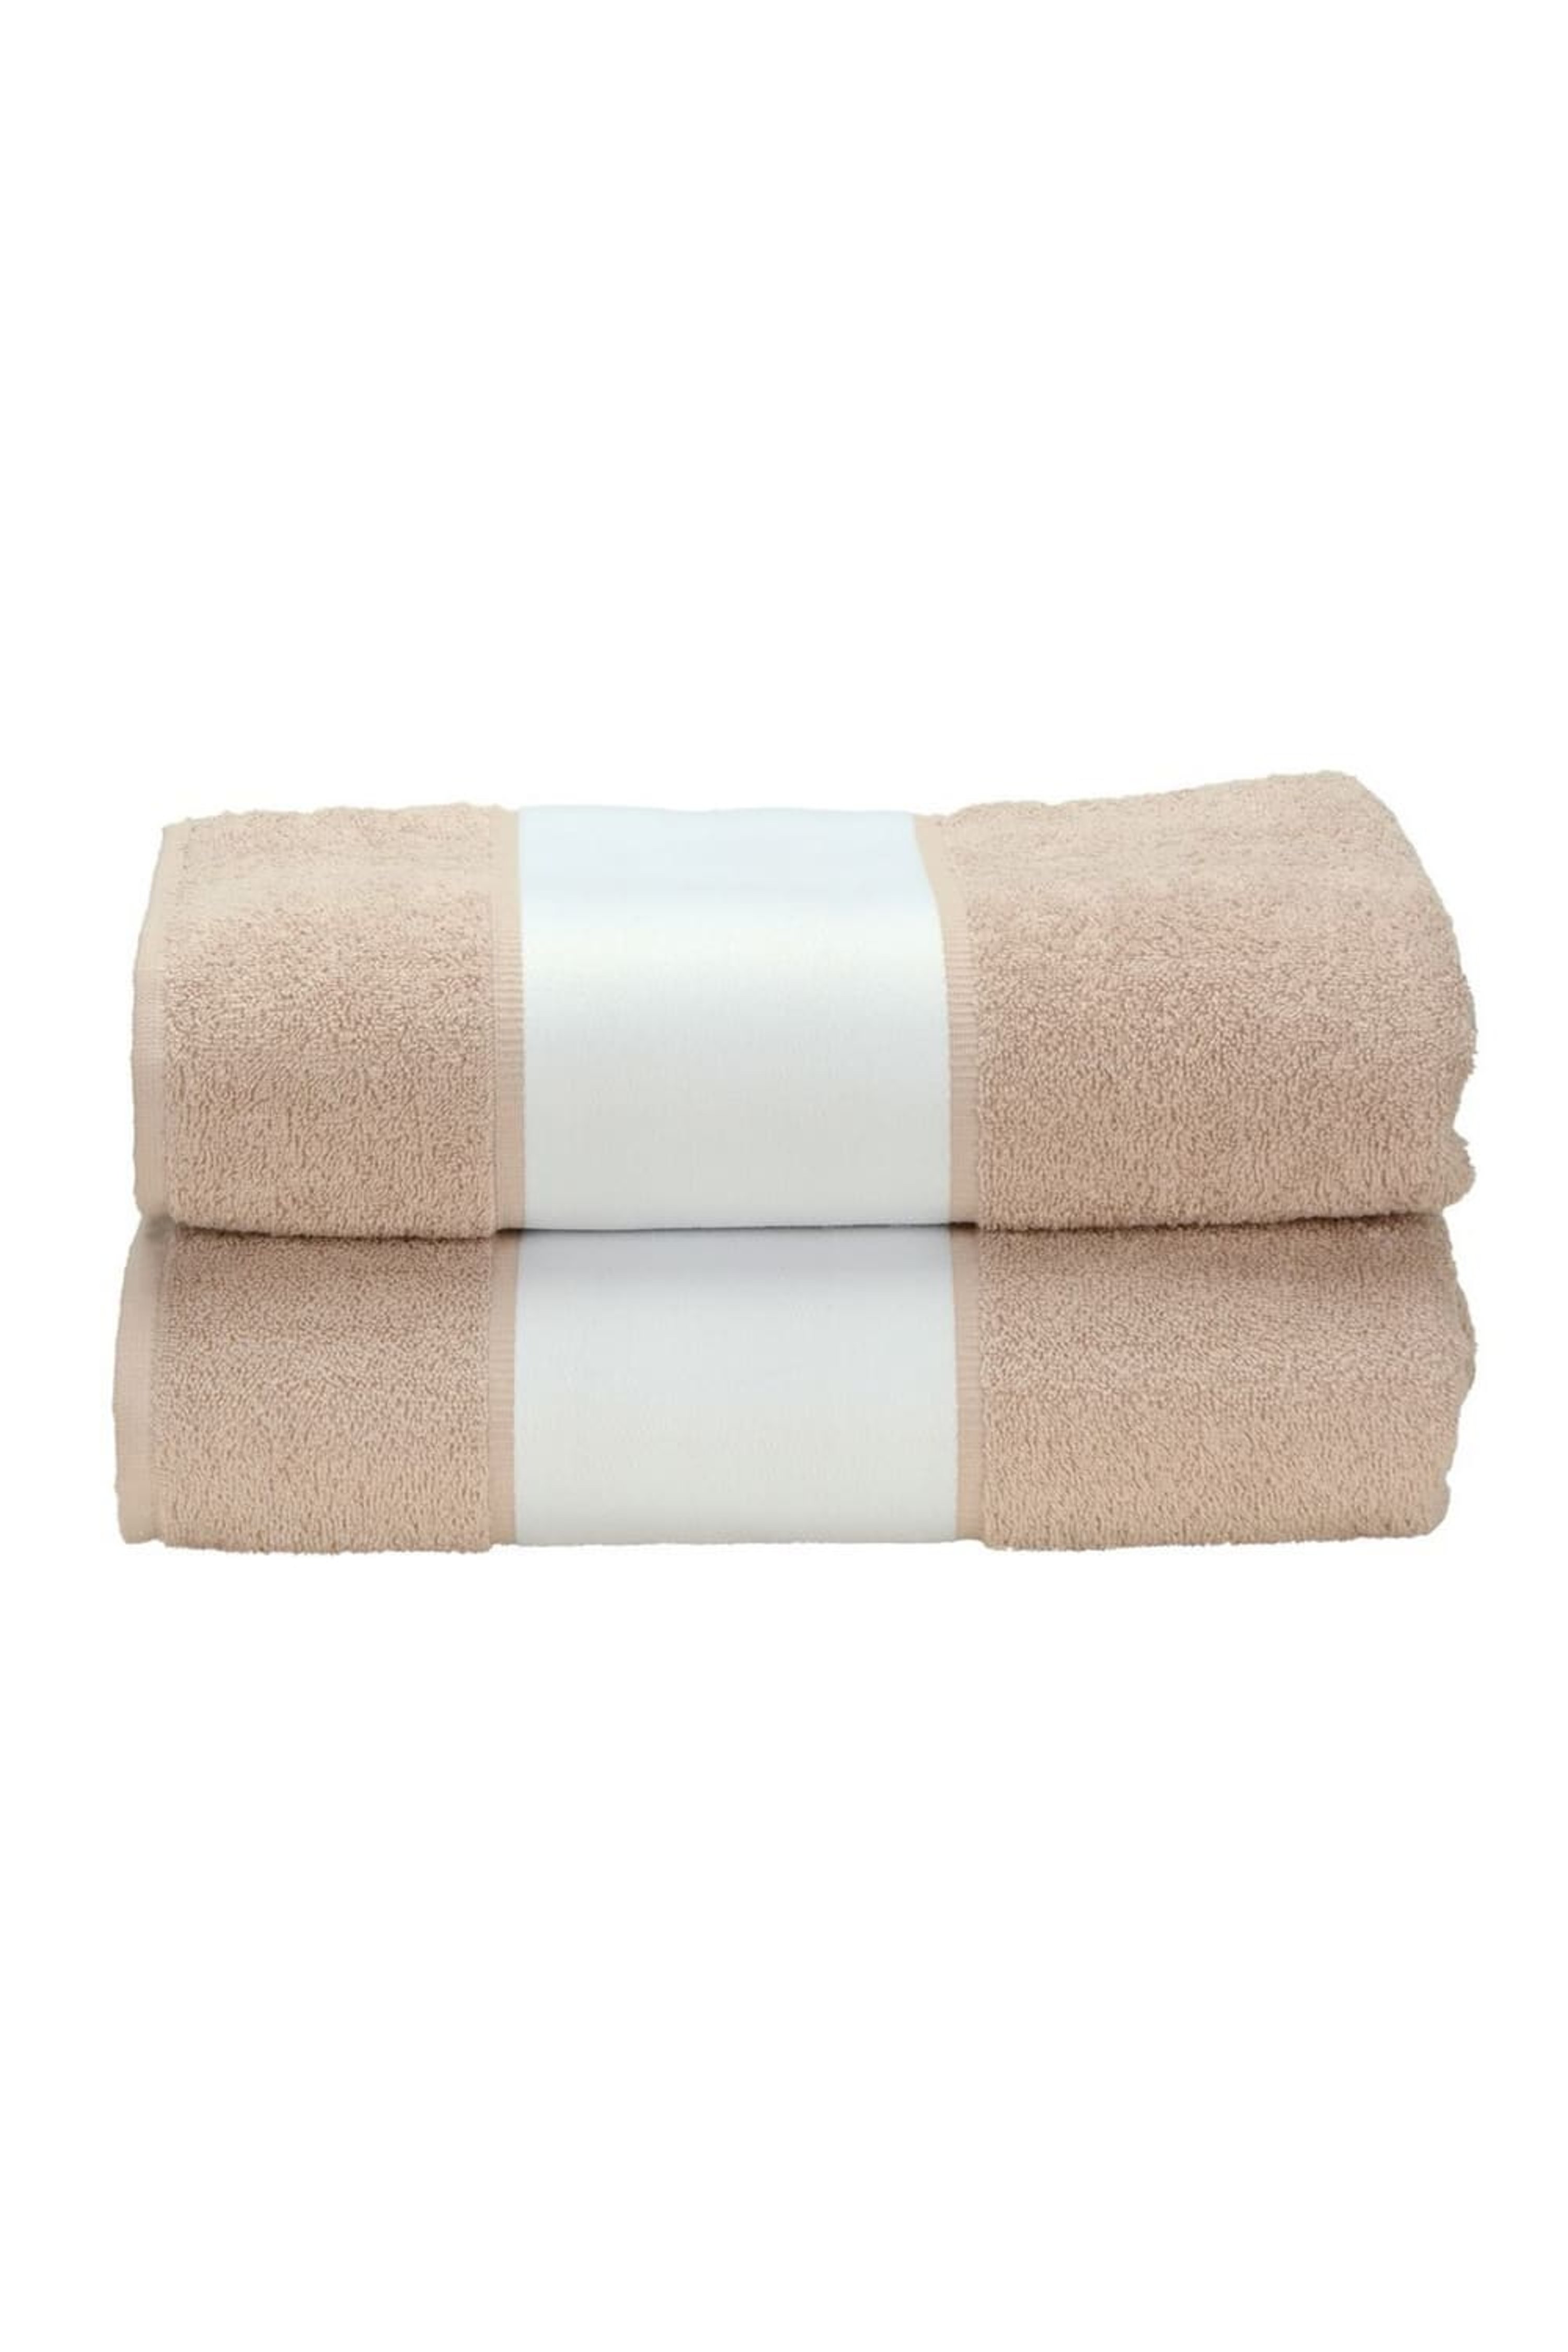 A&R TOWELS A&R TOWELS A&R TOWELS SUBLI-ME BATH TOWEL (SAND) (ONE SIZE)